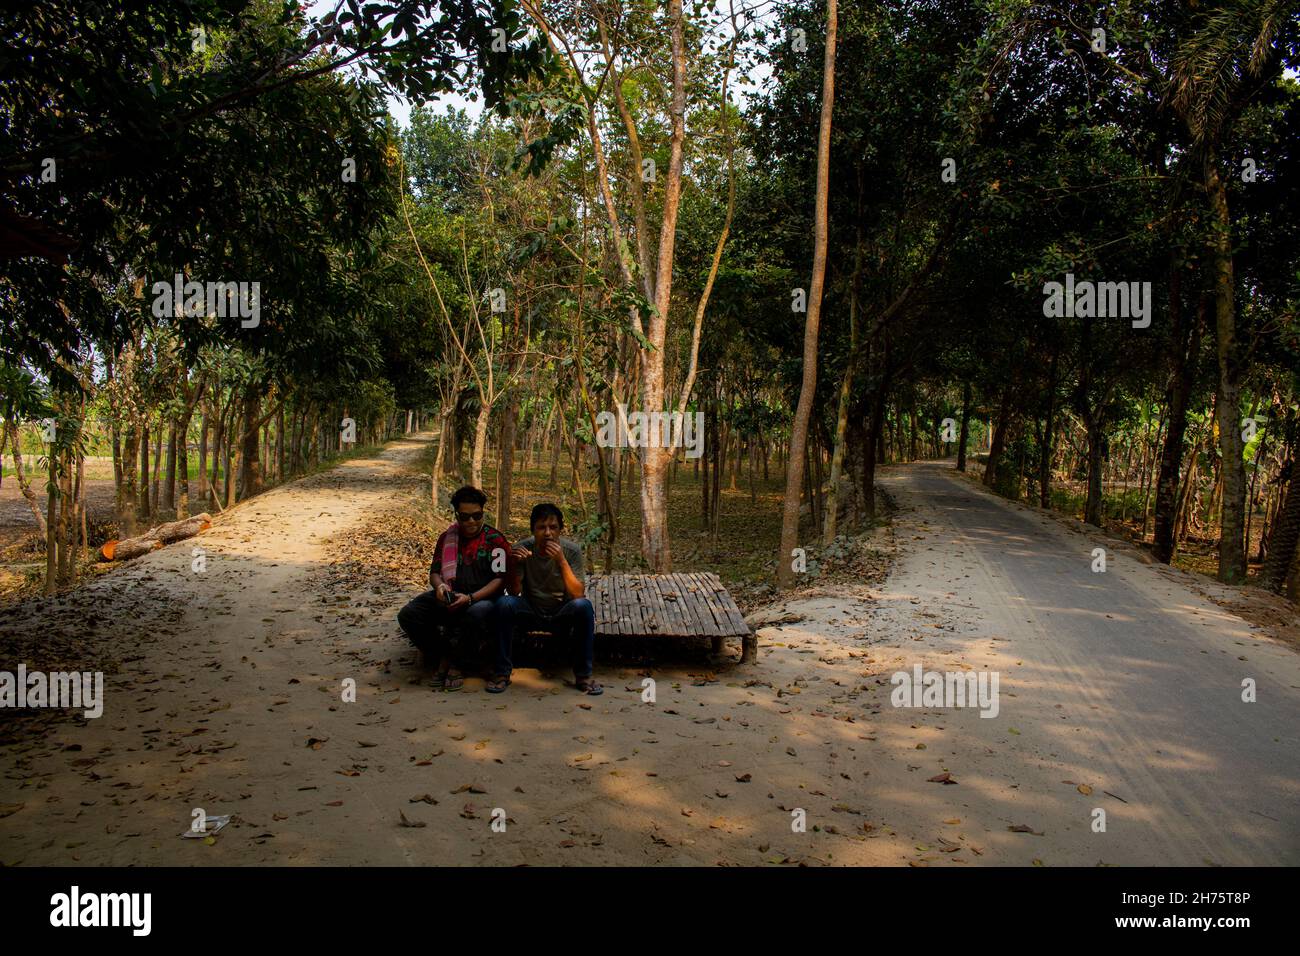 The picture is of the rural background of Bangladesh. The time is noon. Two young men sitting in the shade in the middle of a three-way street. Stock Photo